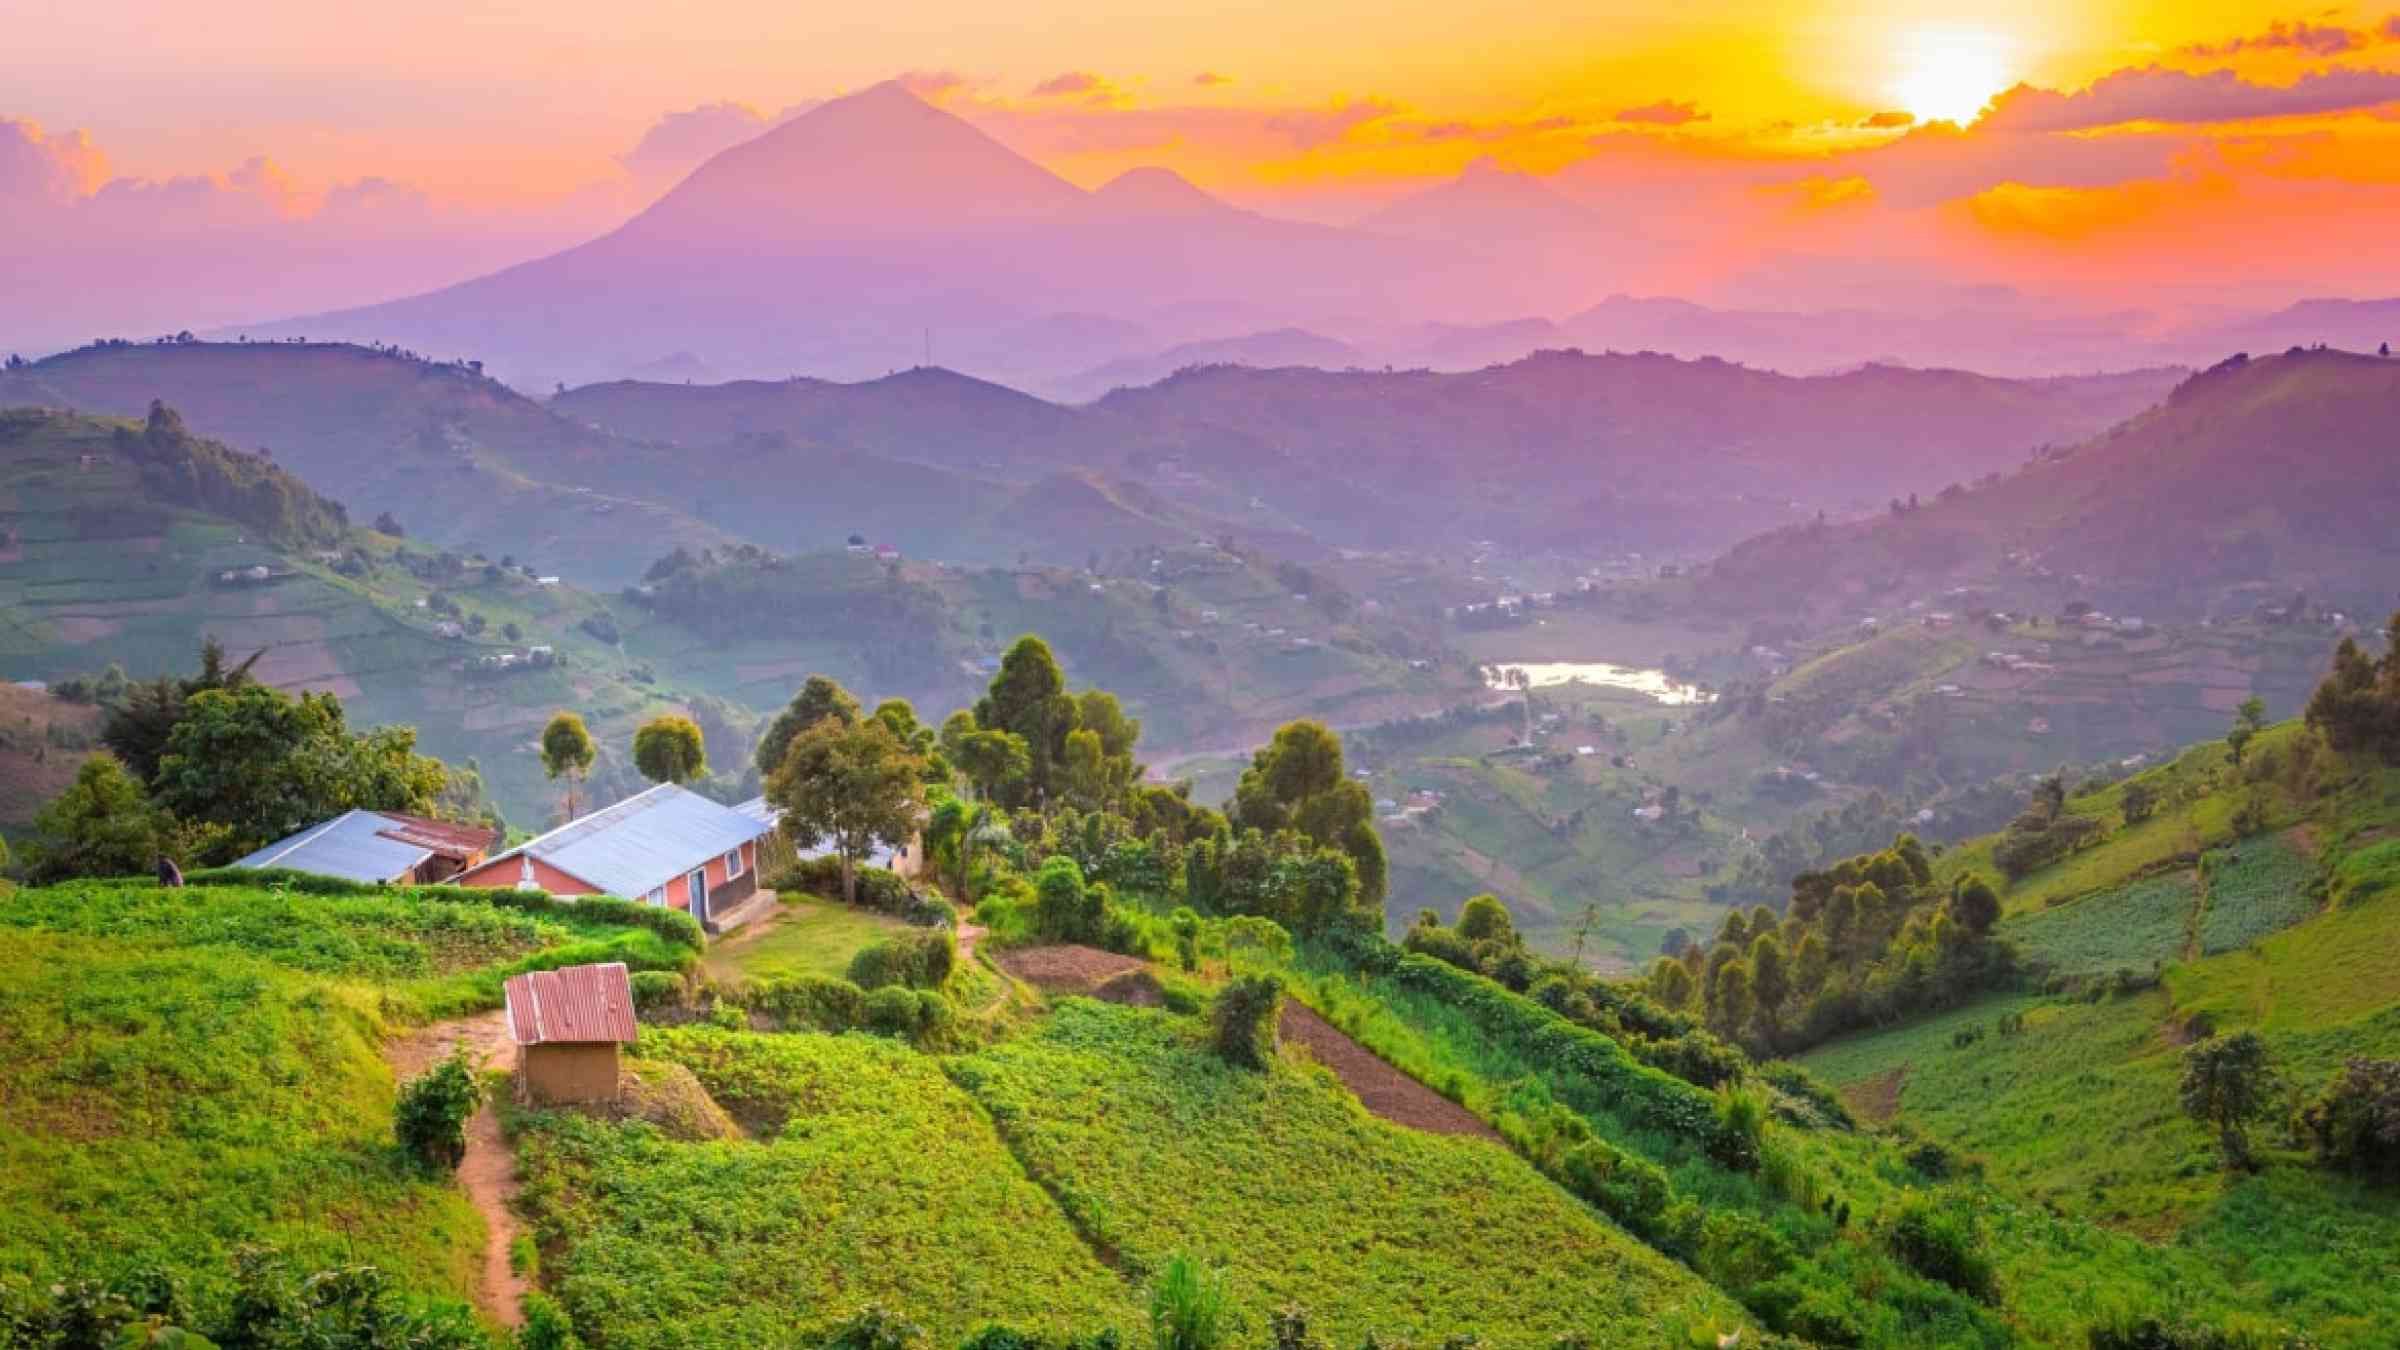 Kisoro Uganda beautiful sunset over mountains and hills of pastures and farms in villages of Uganda.